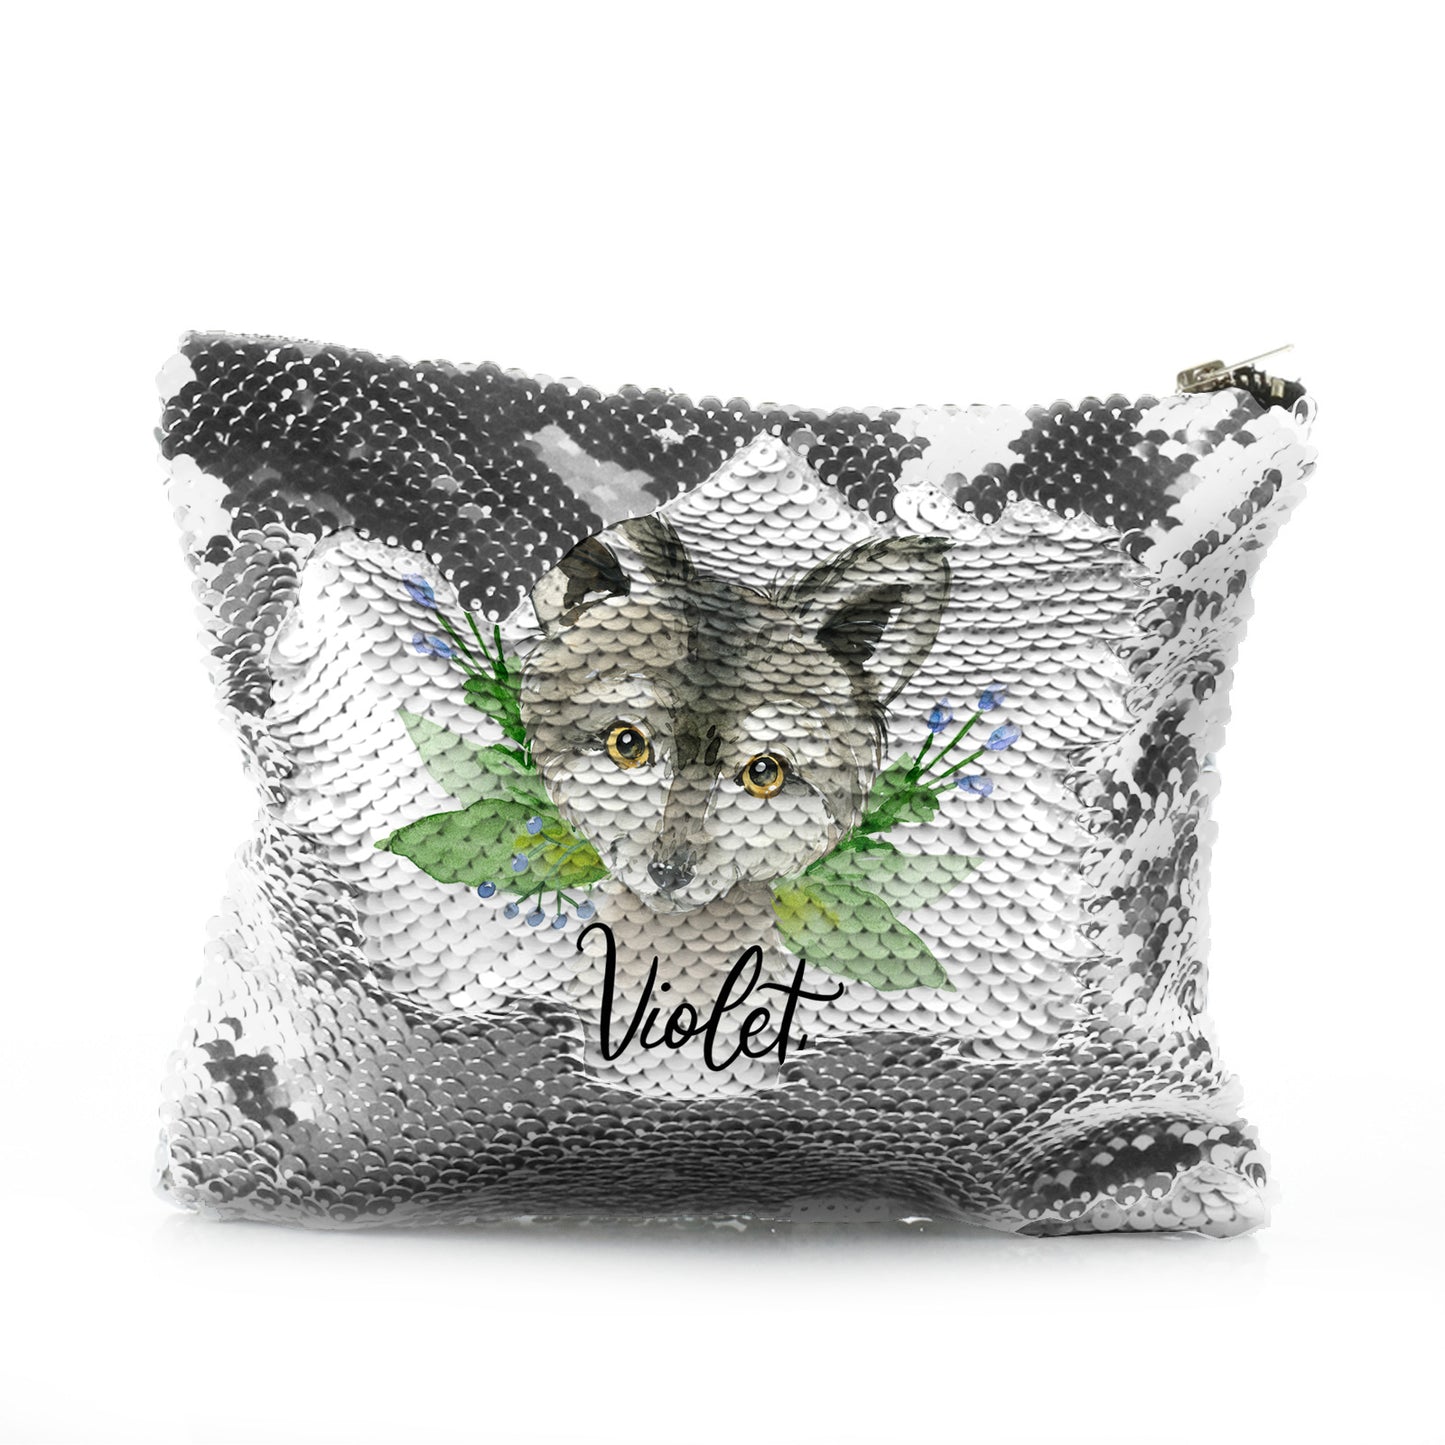 Personalised Sequin Zip Bag with Grey Wolf Blue Flowers and Cute Text